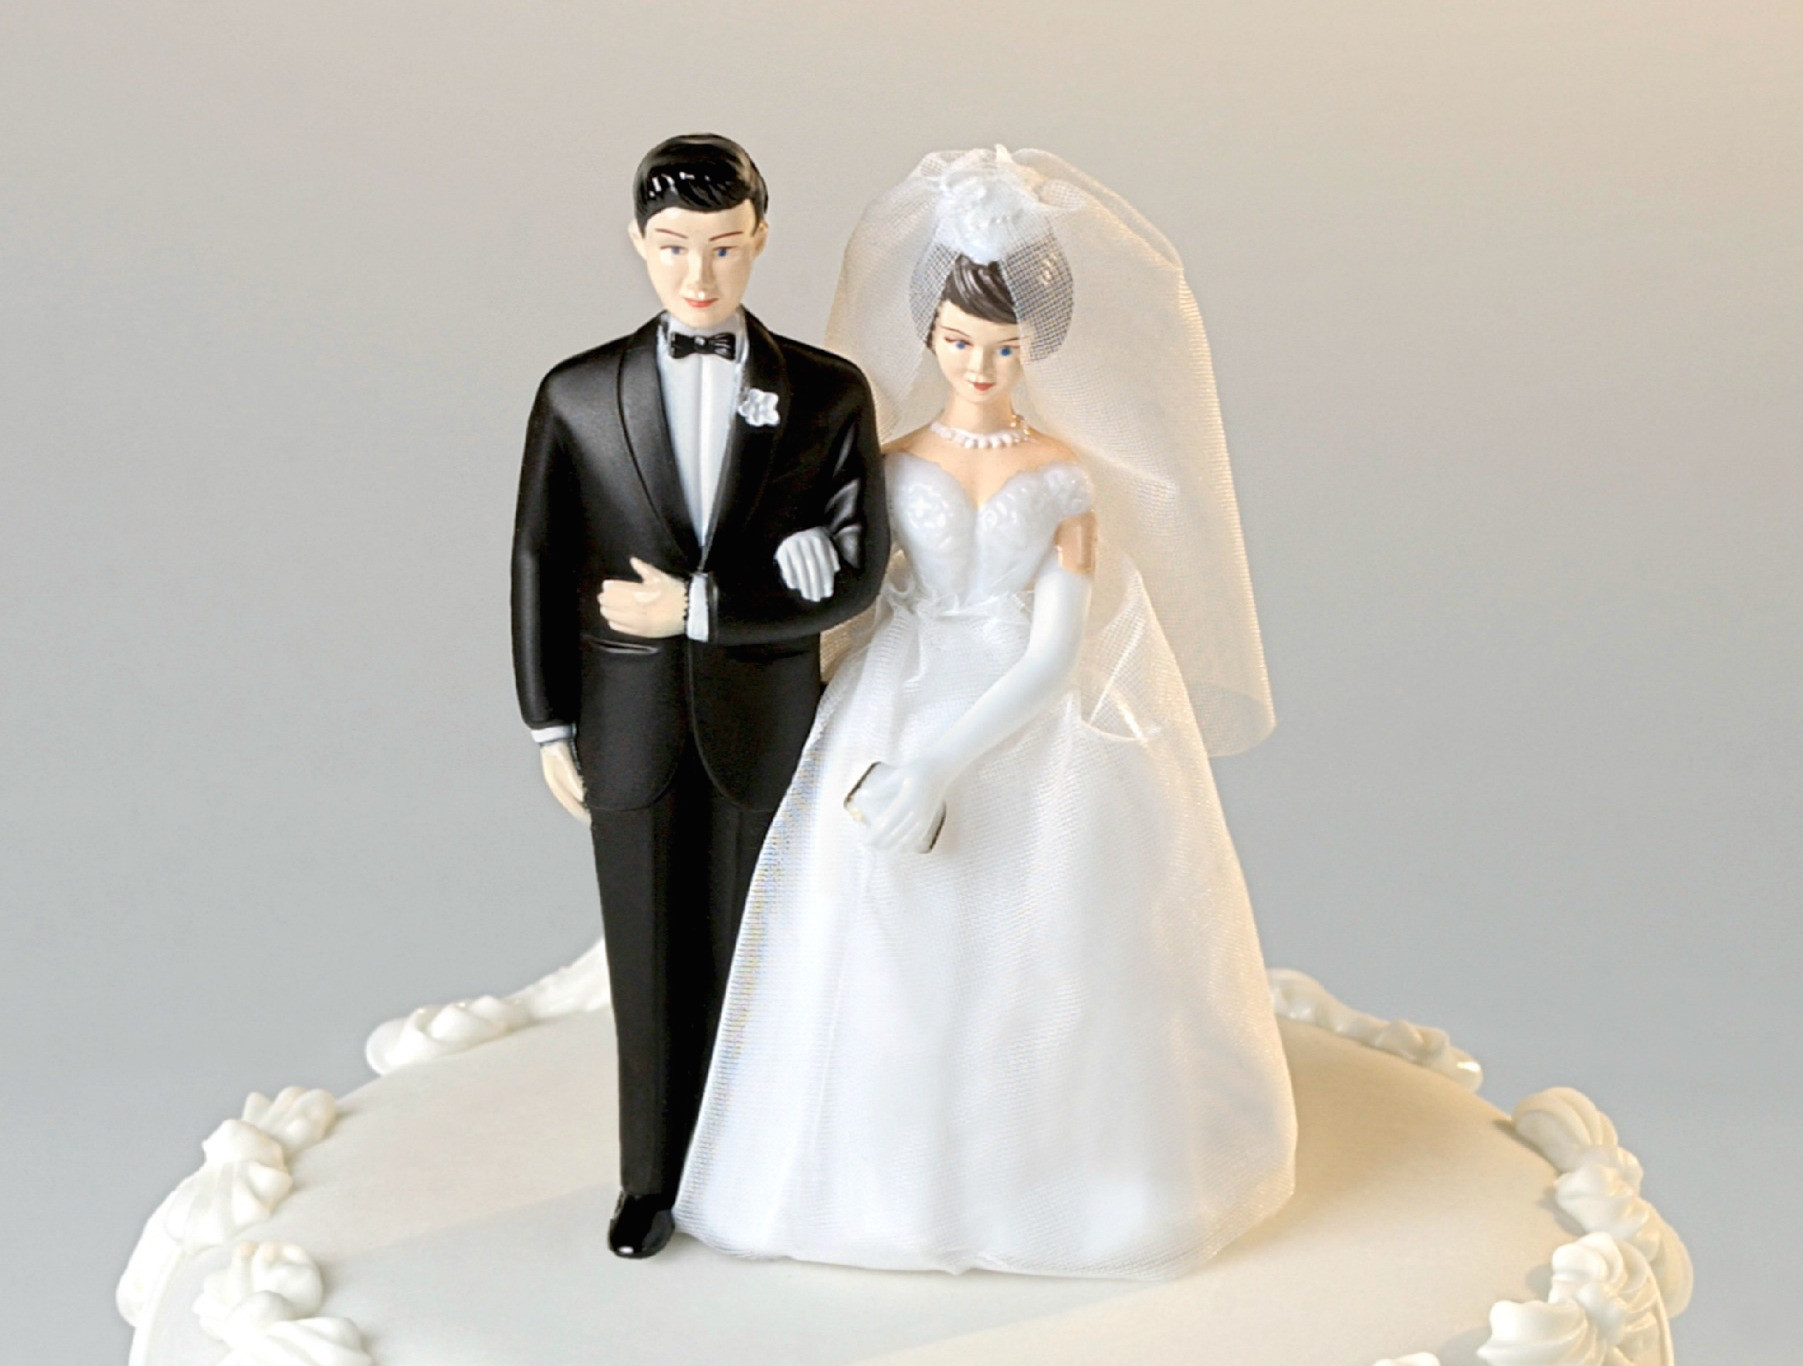 Traditional Wedding Cake Topper
 Traditional wedding cake toppers idea in 2017